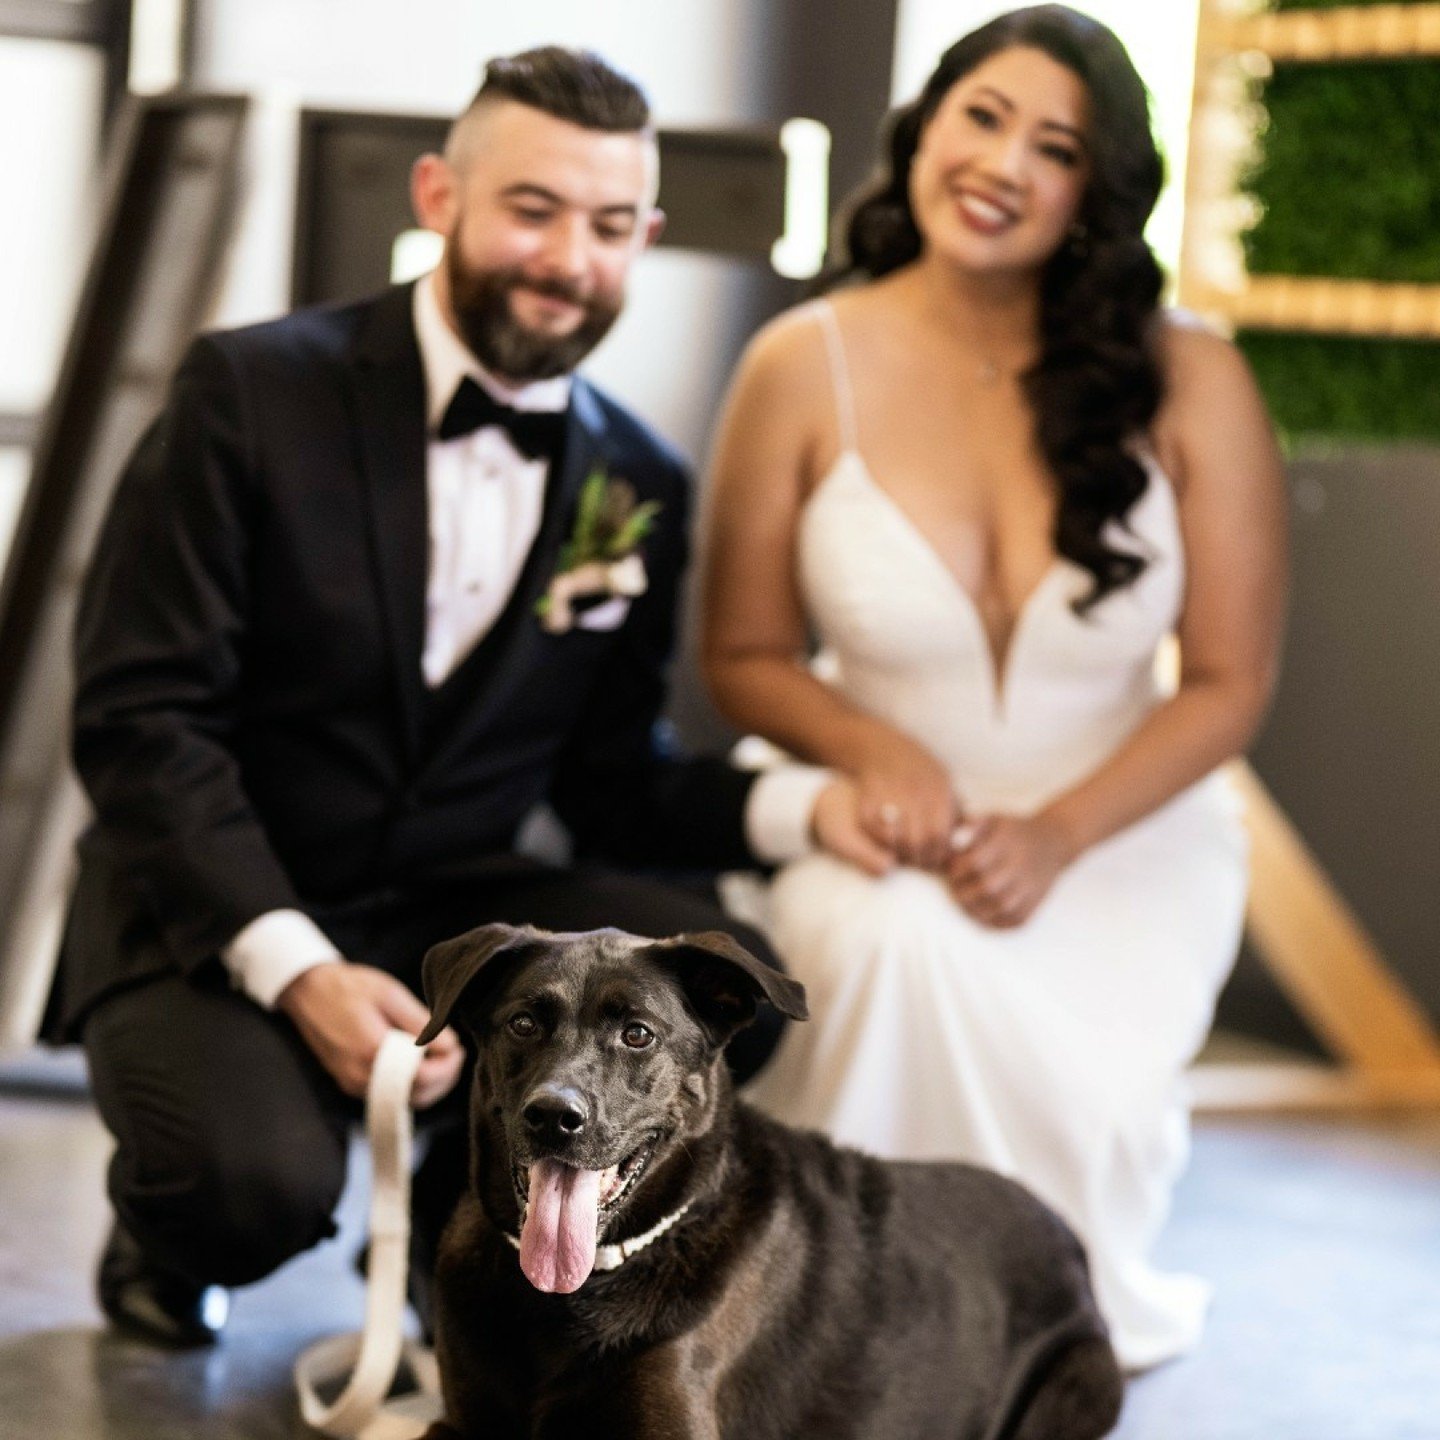 I'm all about including your furry friends in the big day because, let's be real, they're just as much a part of the family! 🐾💕 Whether they're trotting down the aisle or stealing the show in adorable wedding attire, your beloved companions add an 